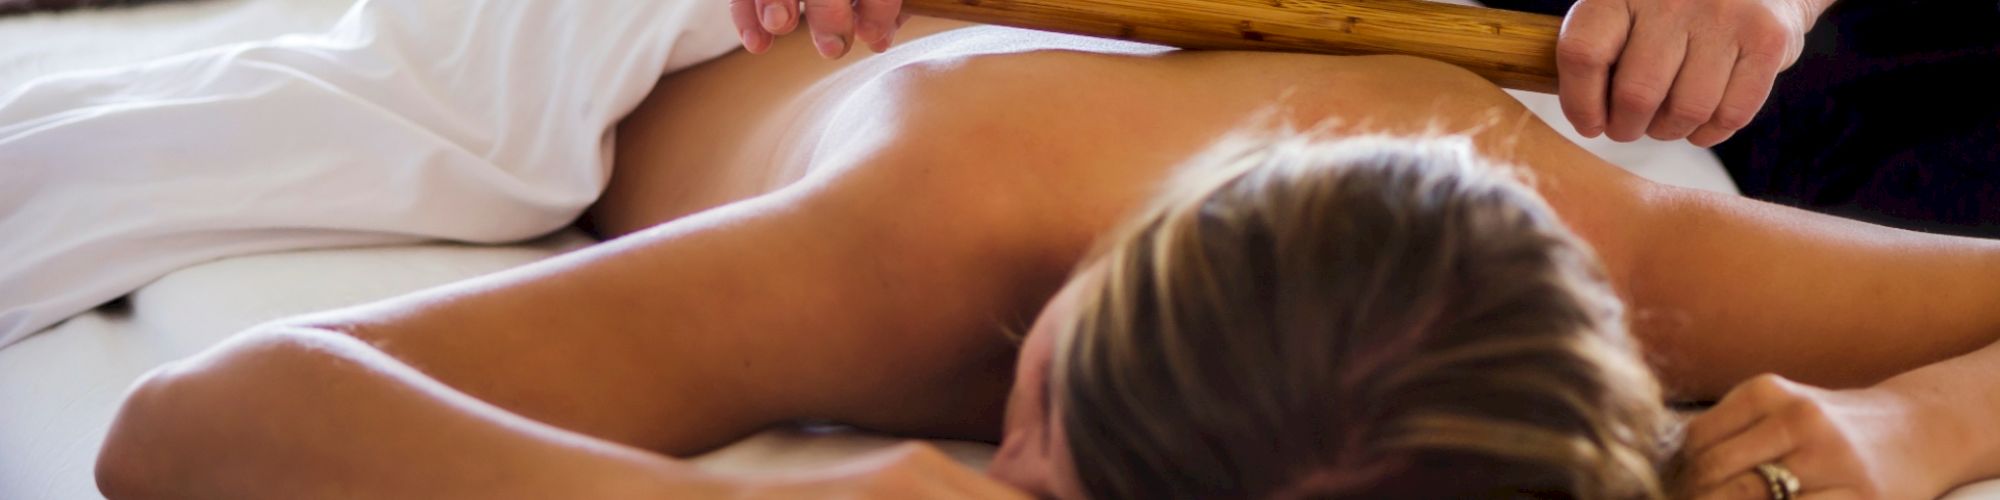 A person is lying face down on a massage table receiving a back massage with a wooden stick.